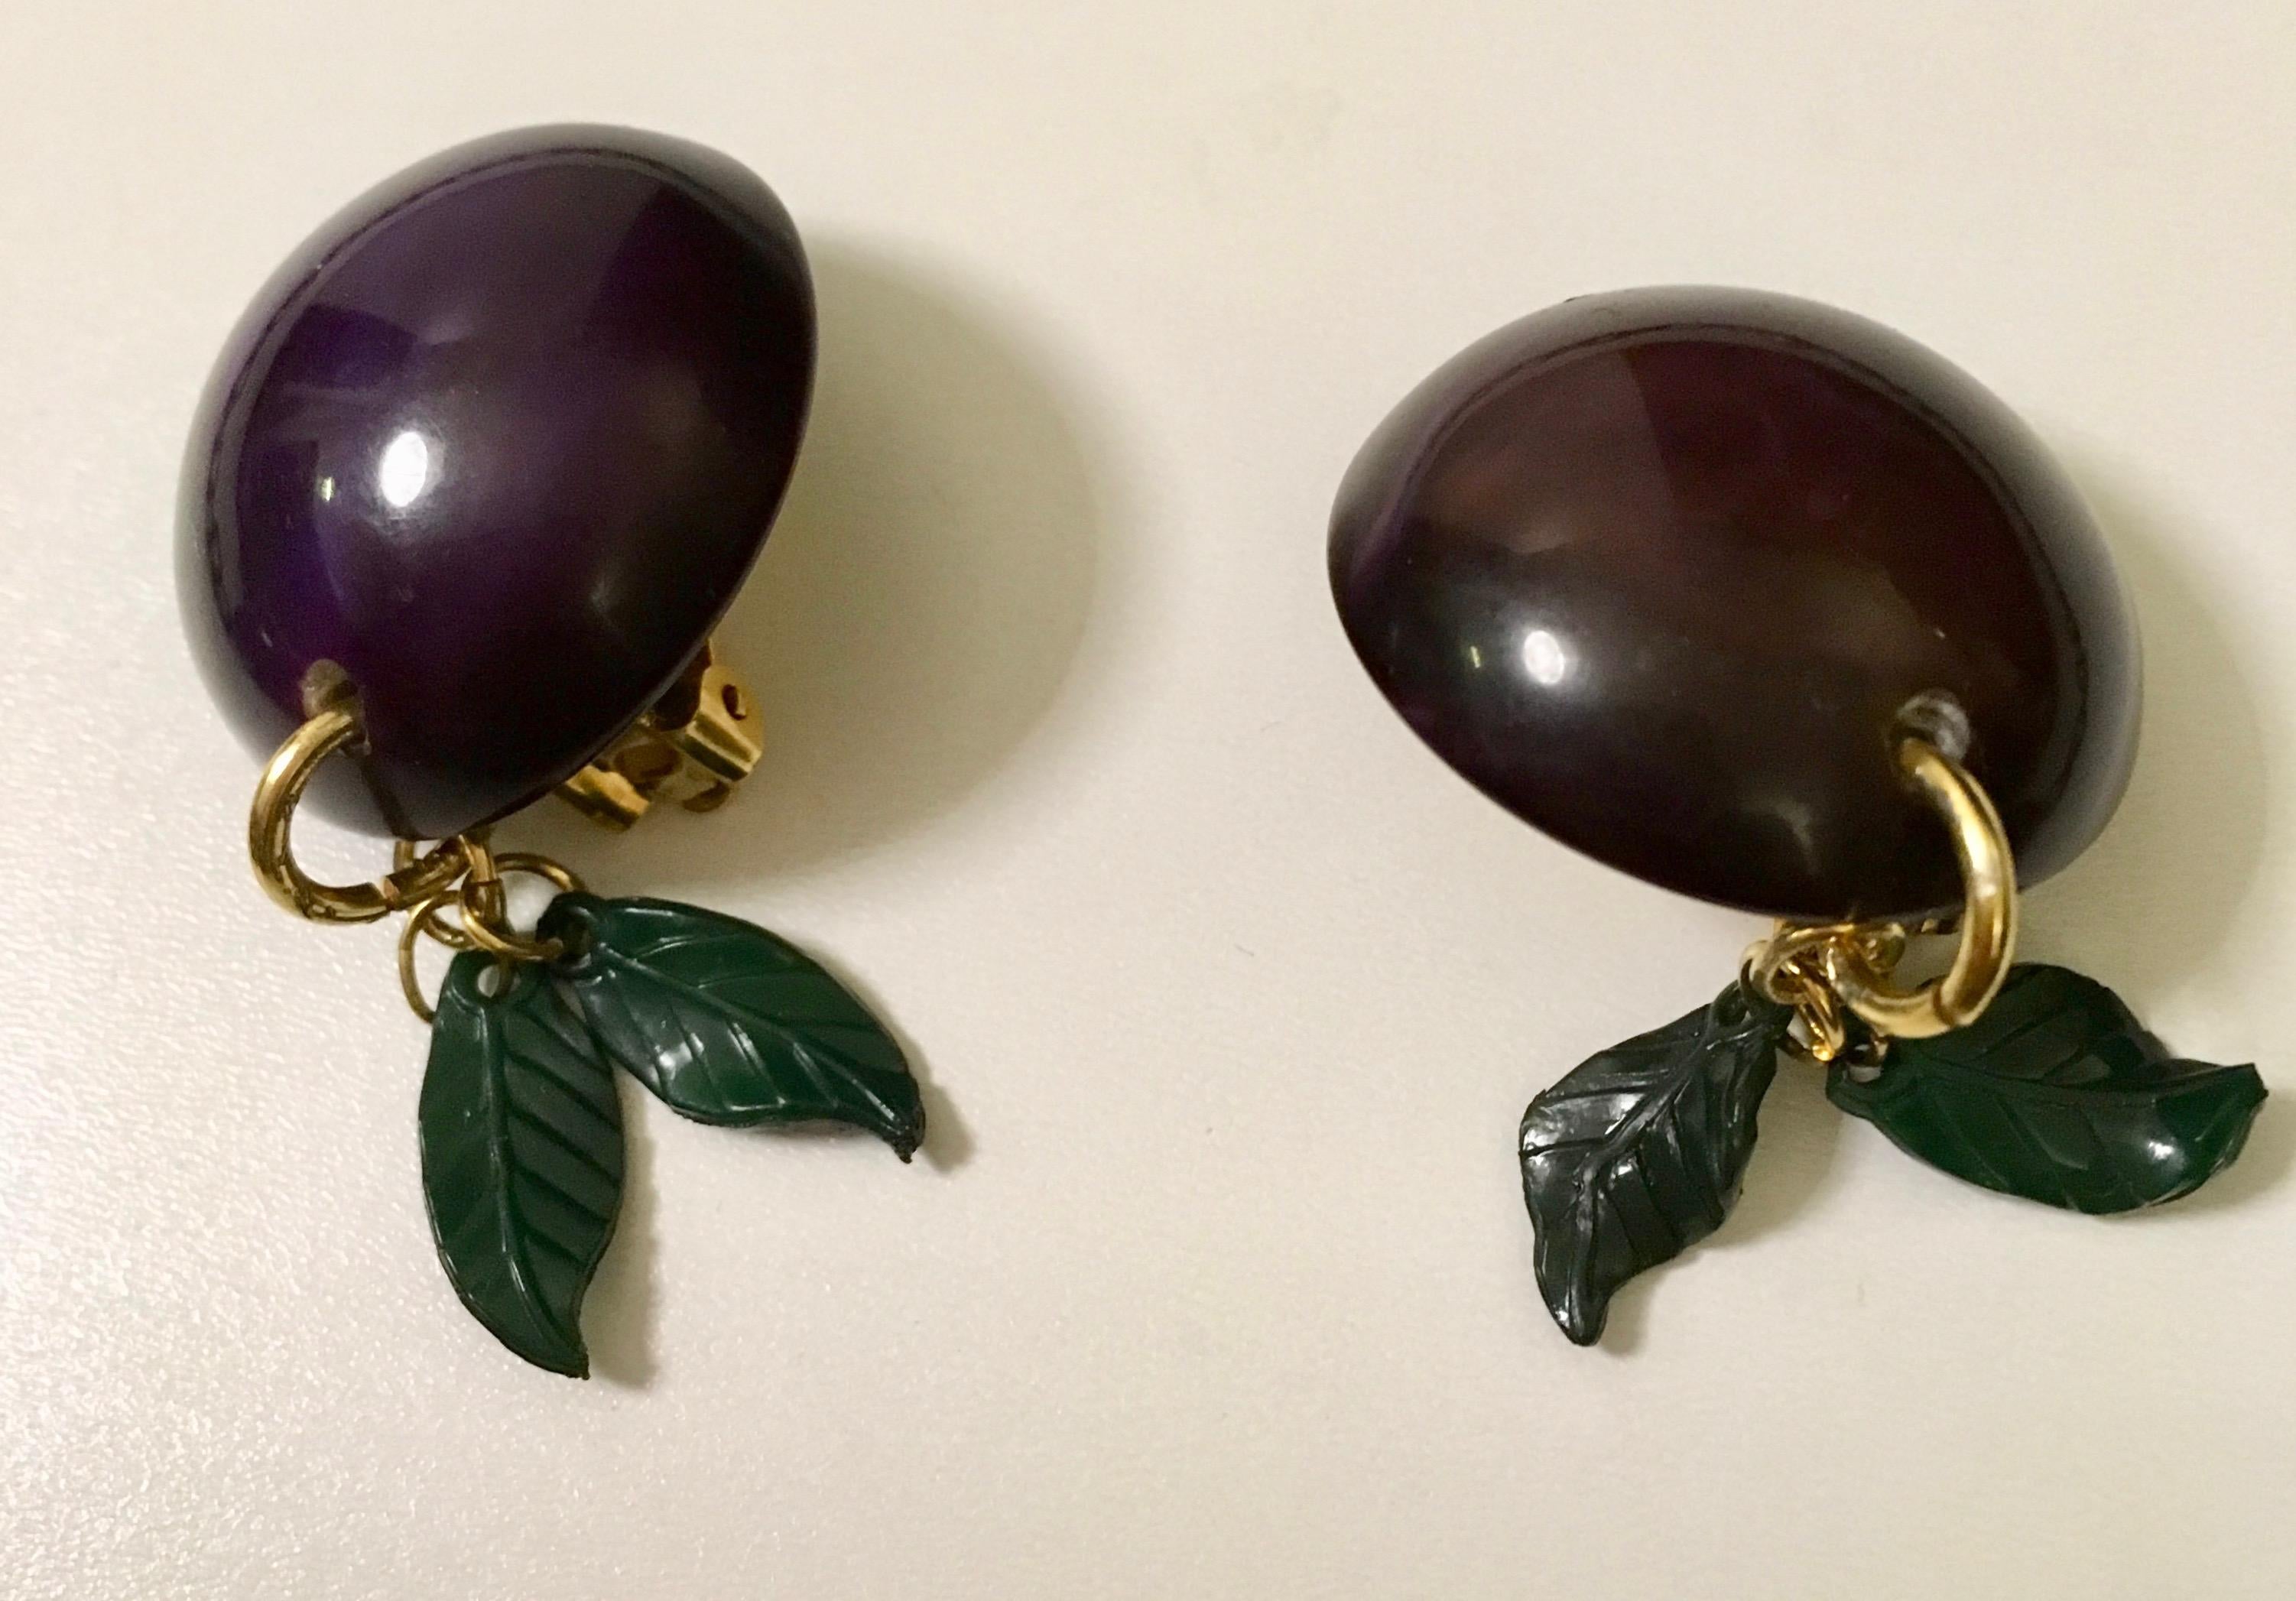 Presented here is a beautiful Jan Carlin cherry bakelite necklace with matching clip earrings. The grapes on the earrings and on the bracelet each measure 1.0 inches in diameter. The earrings and the necklace are both signed 'Jan Carlin.' The